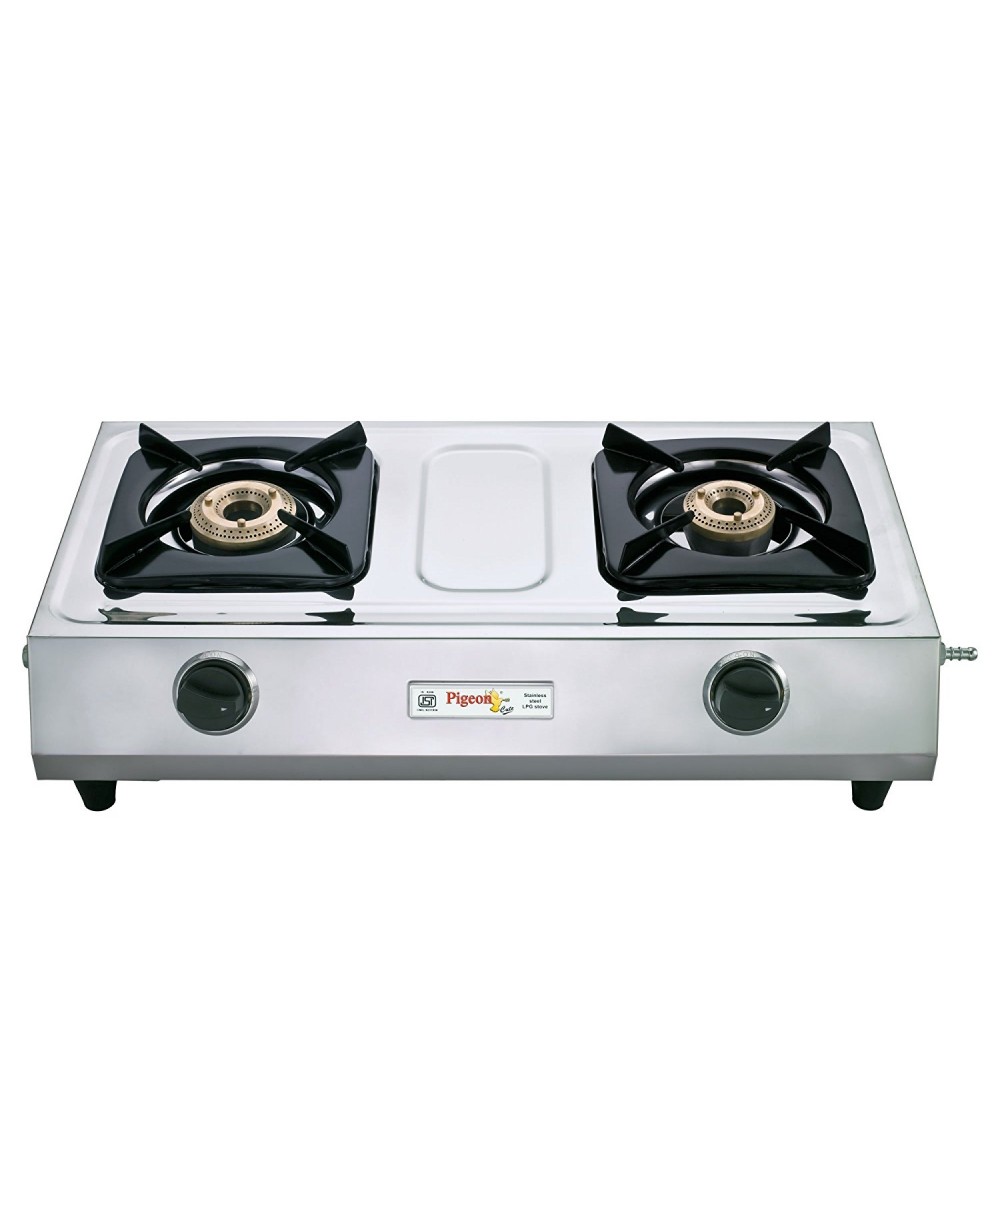 Stainless Steel LPG Stoves 2 cute Auto